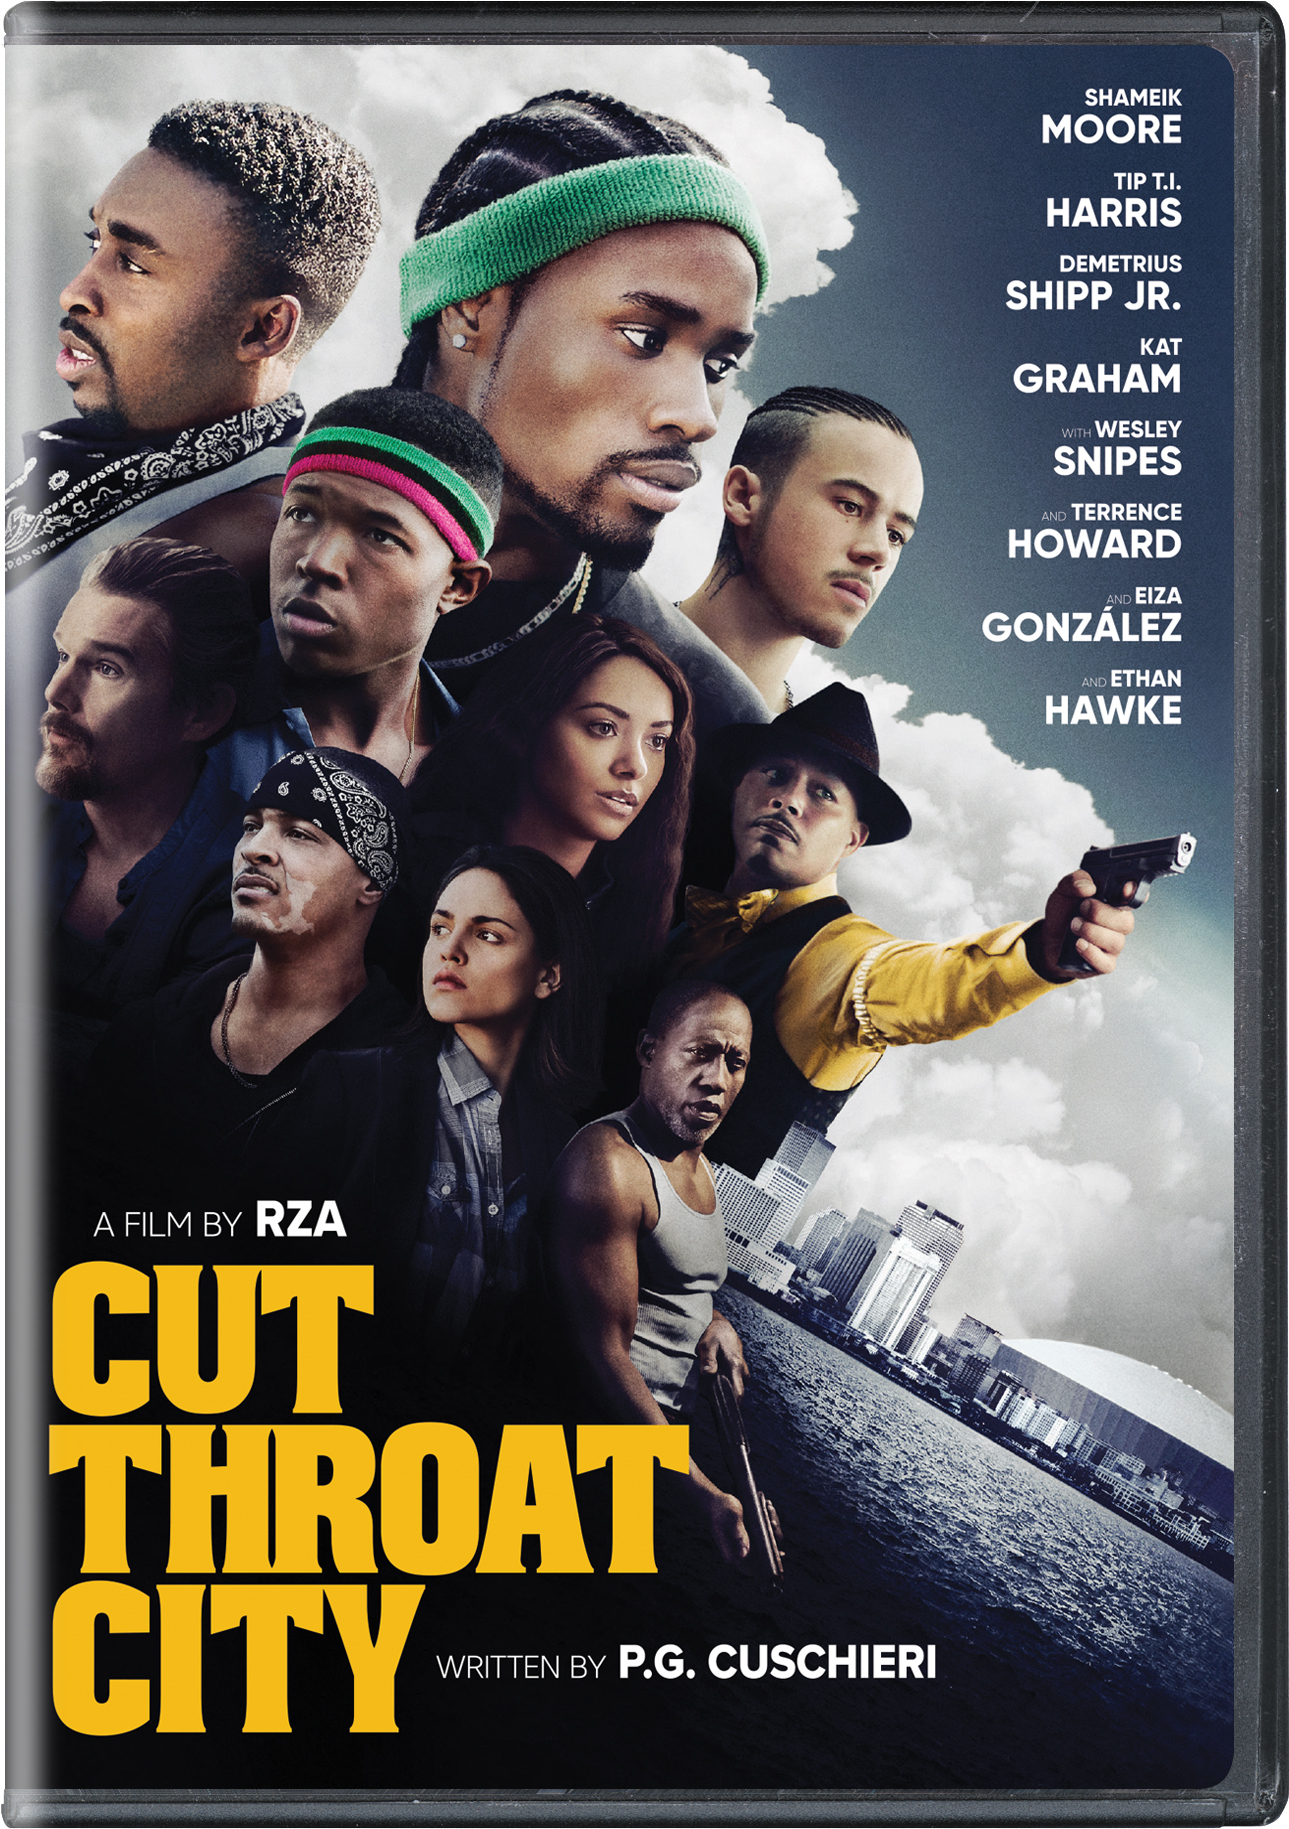 Cut Throat City - DVD [ 2020 ]  - Action Movies On DVD - Movies On GRUV